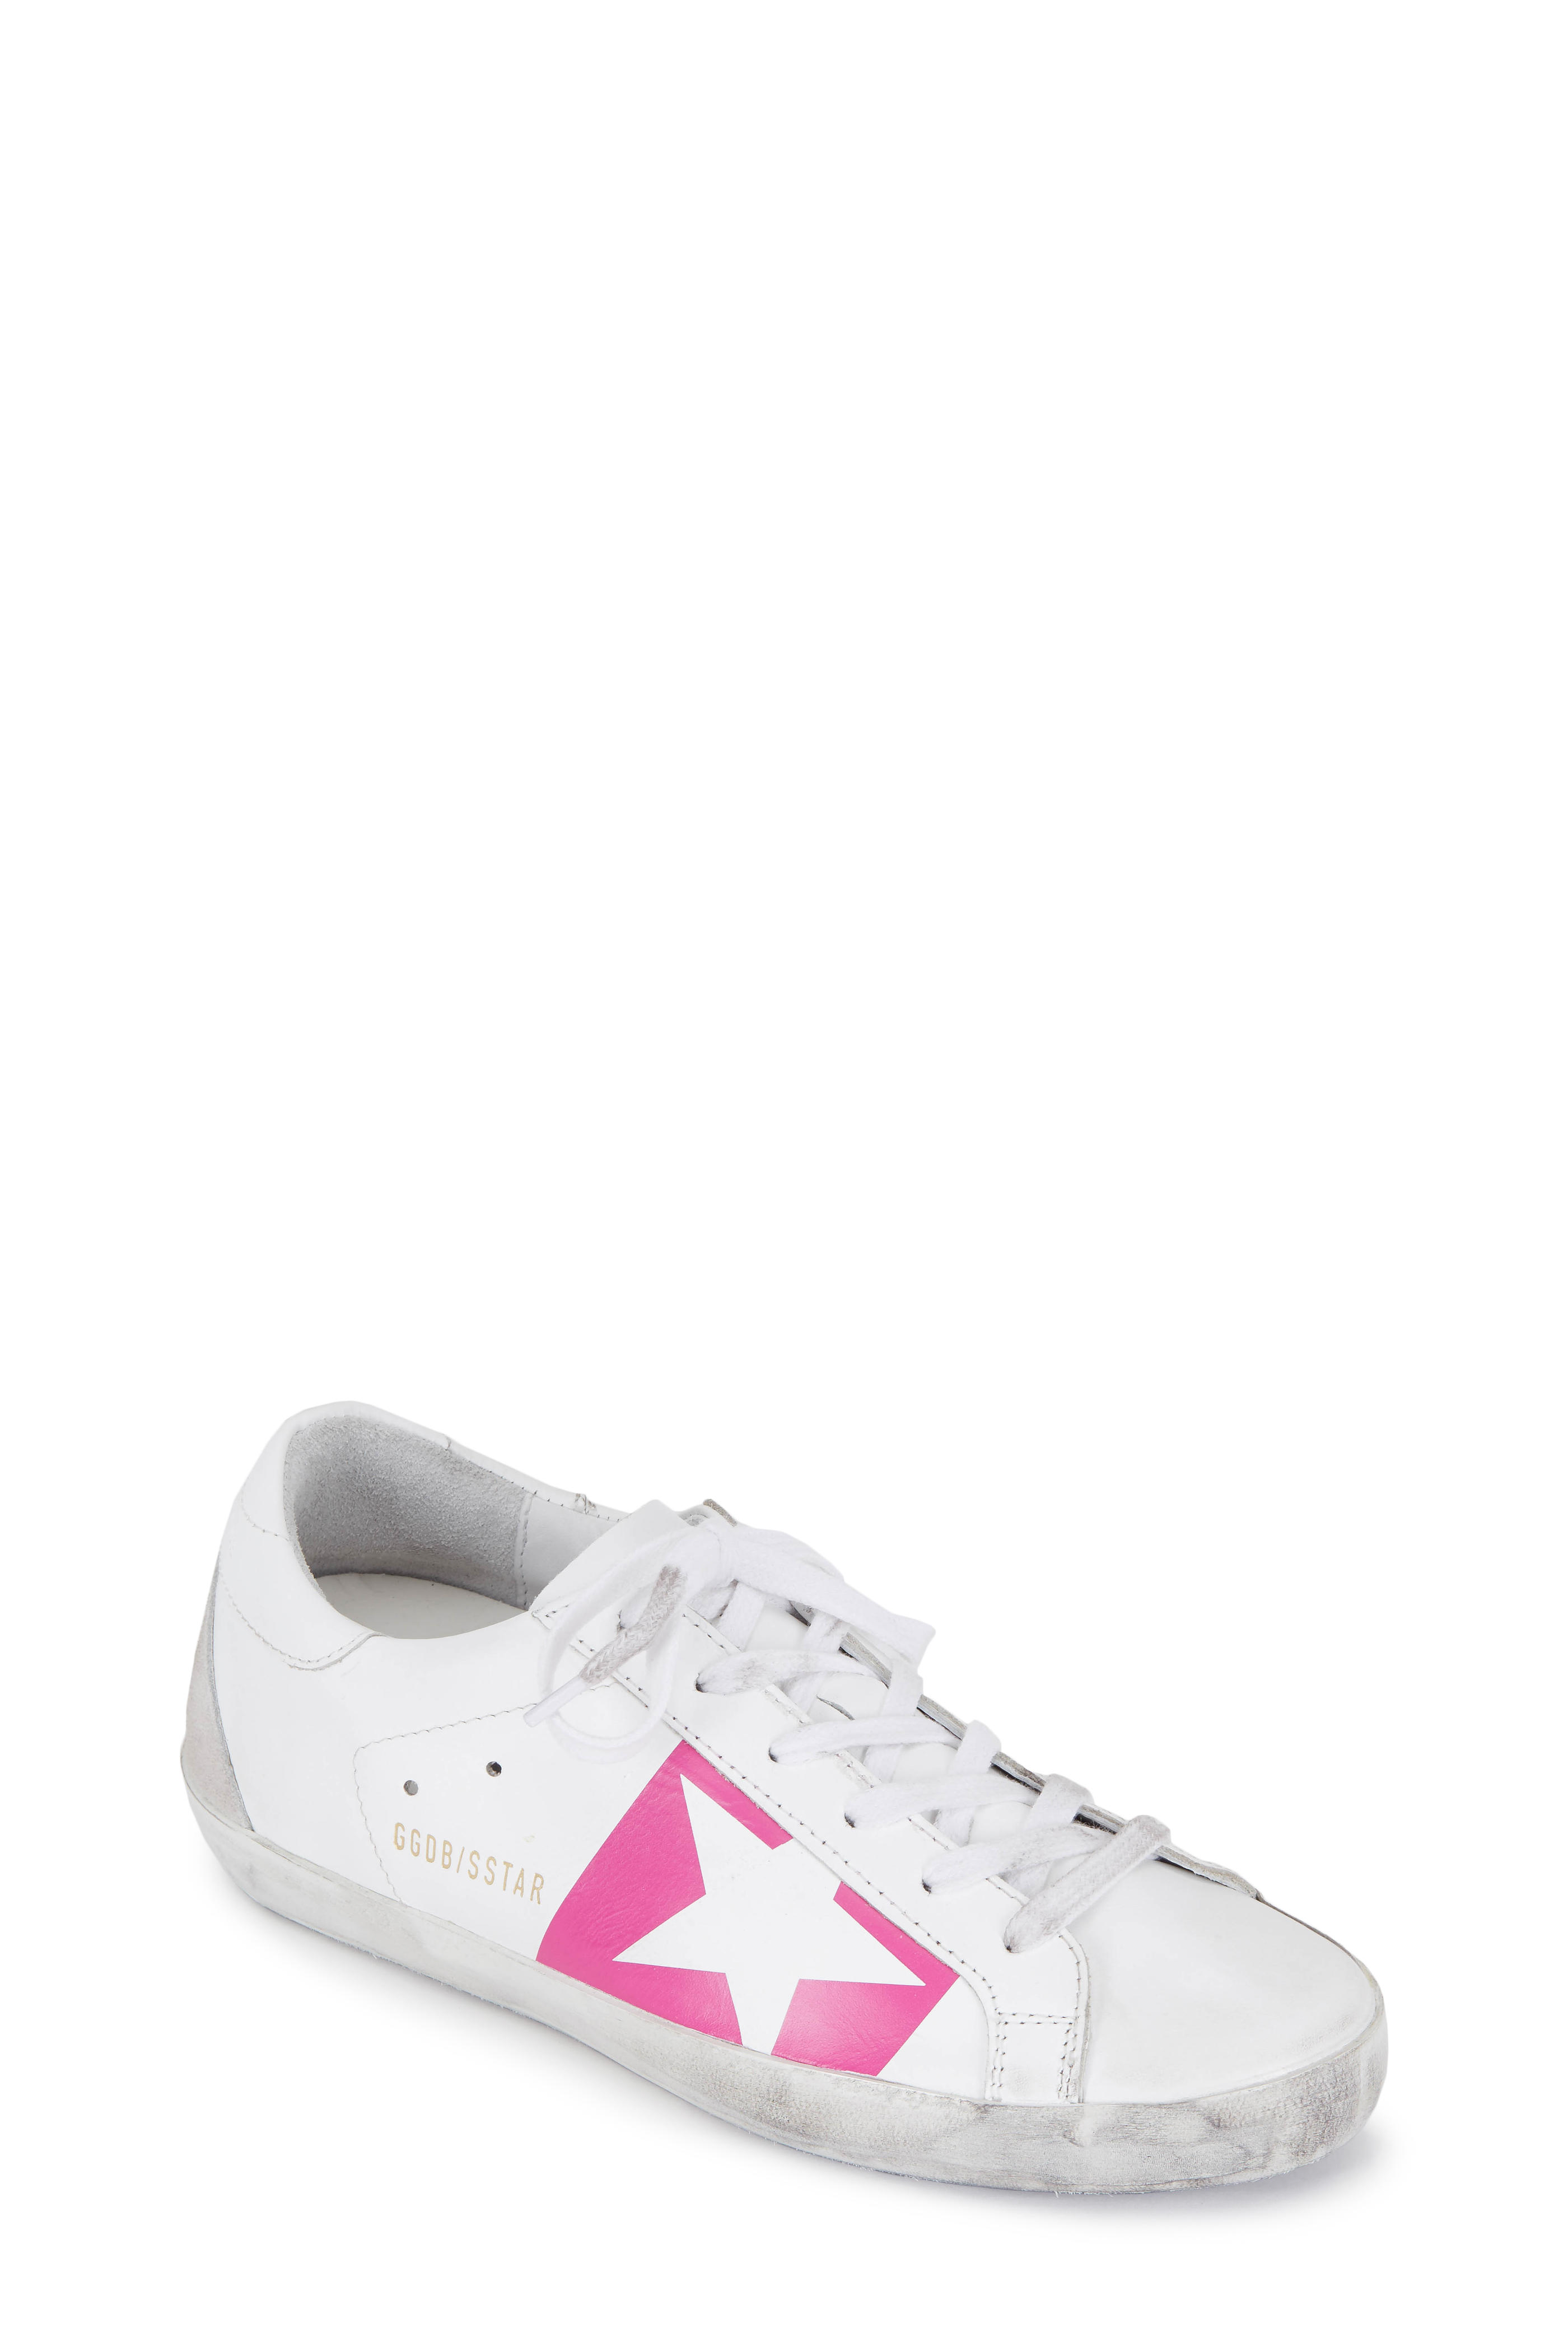 golden goose sneakers with pink star